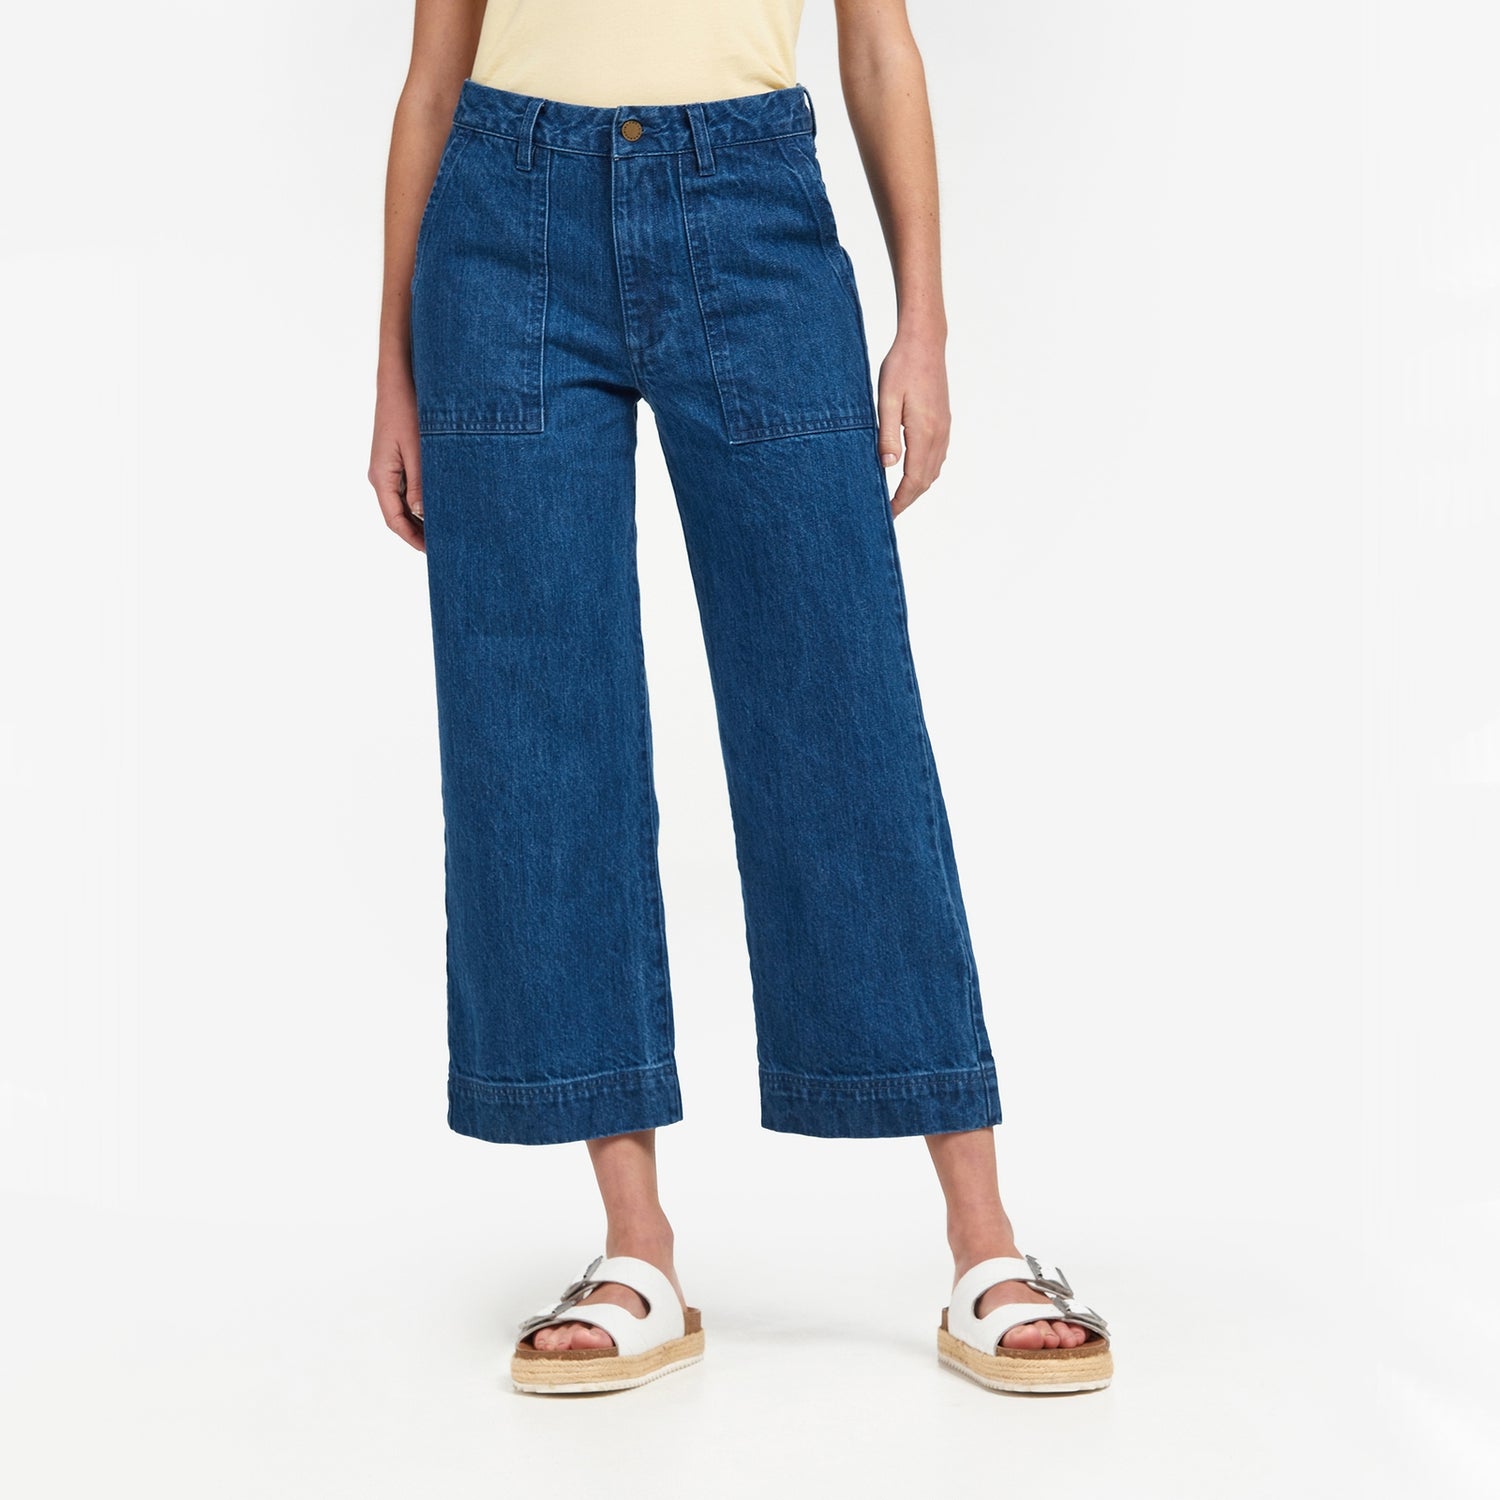 Barbour Southport Cropped Denim Jeans - UK 10